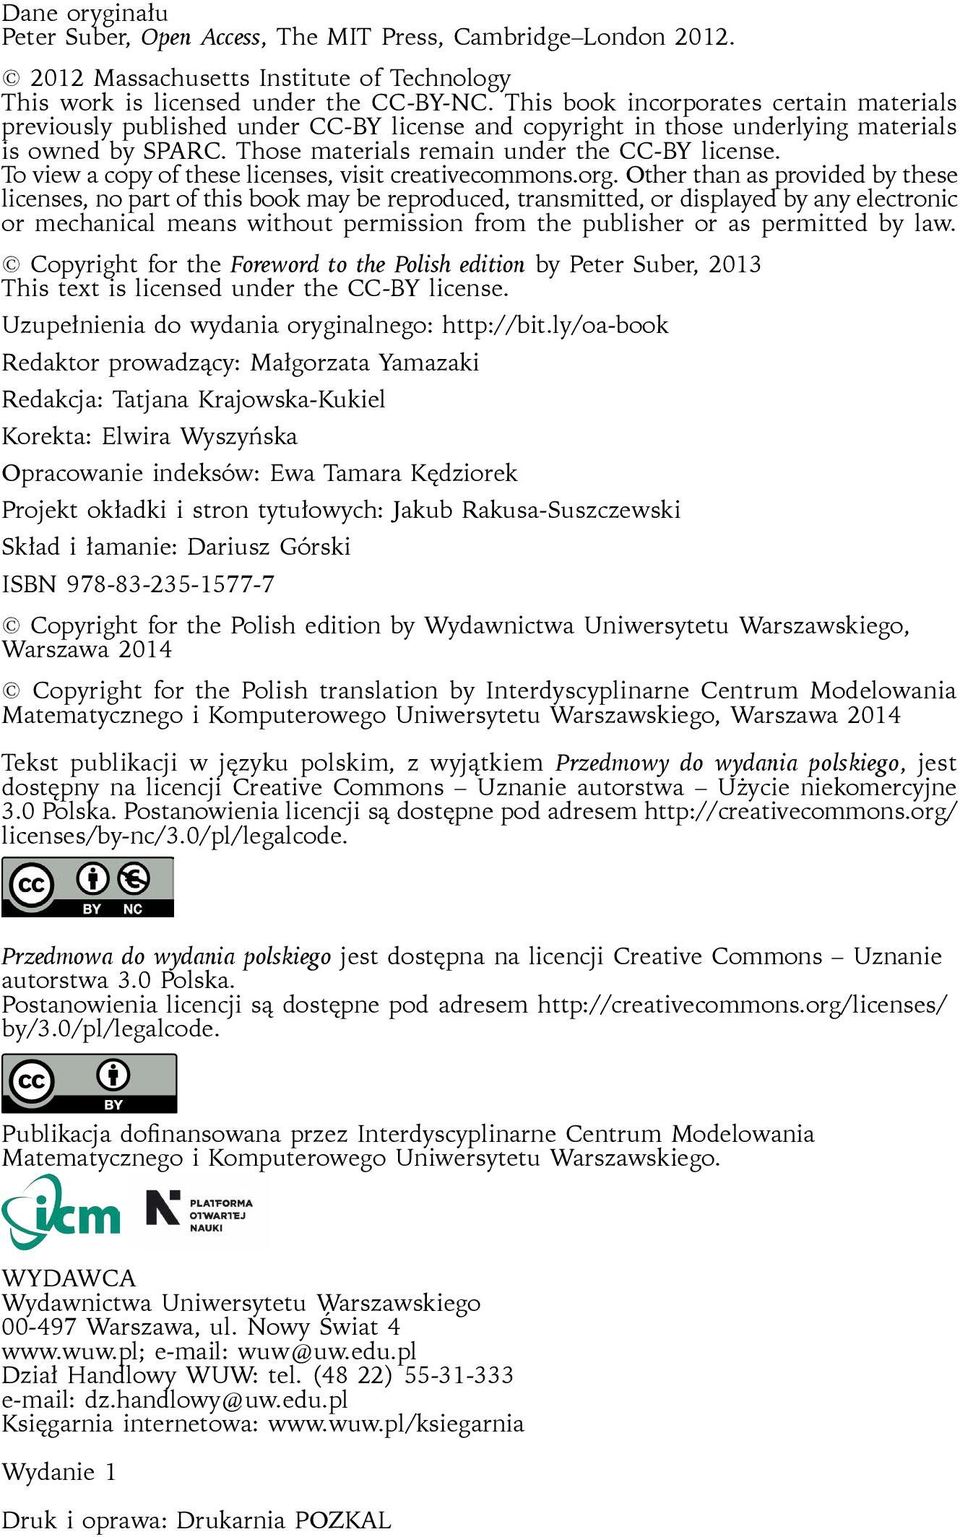 To view a copy of these licenses, visit creativecommons.org.